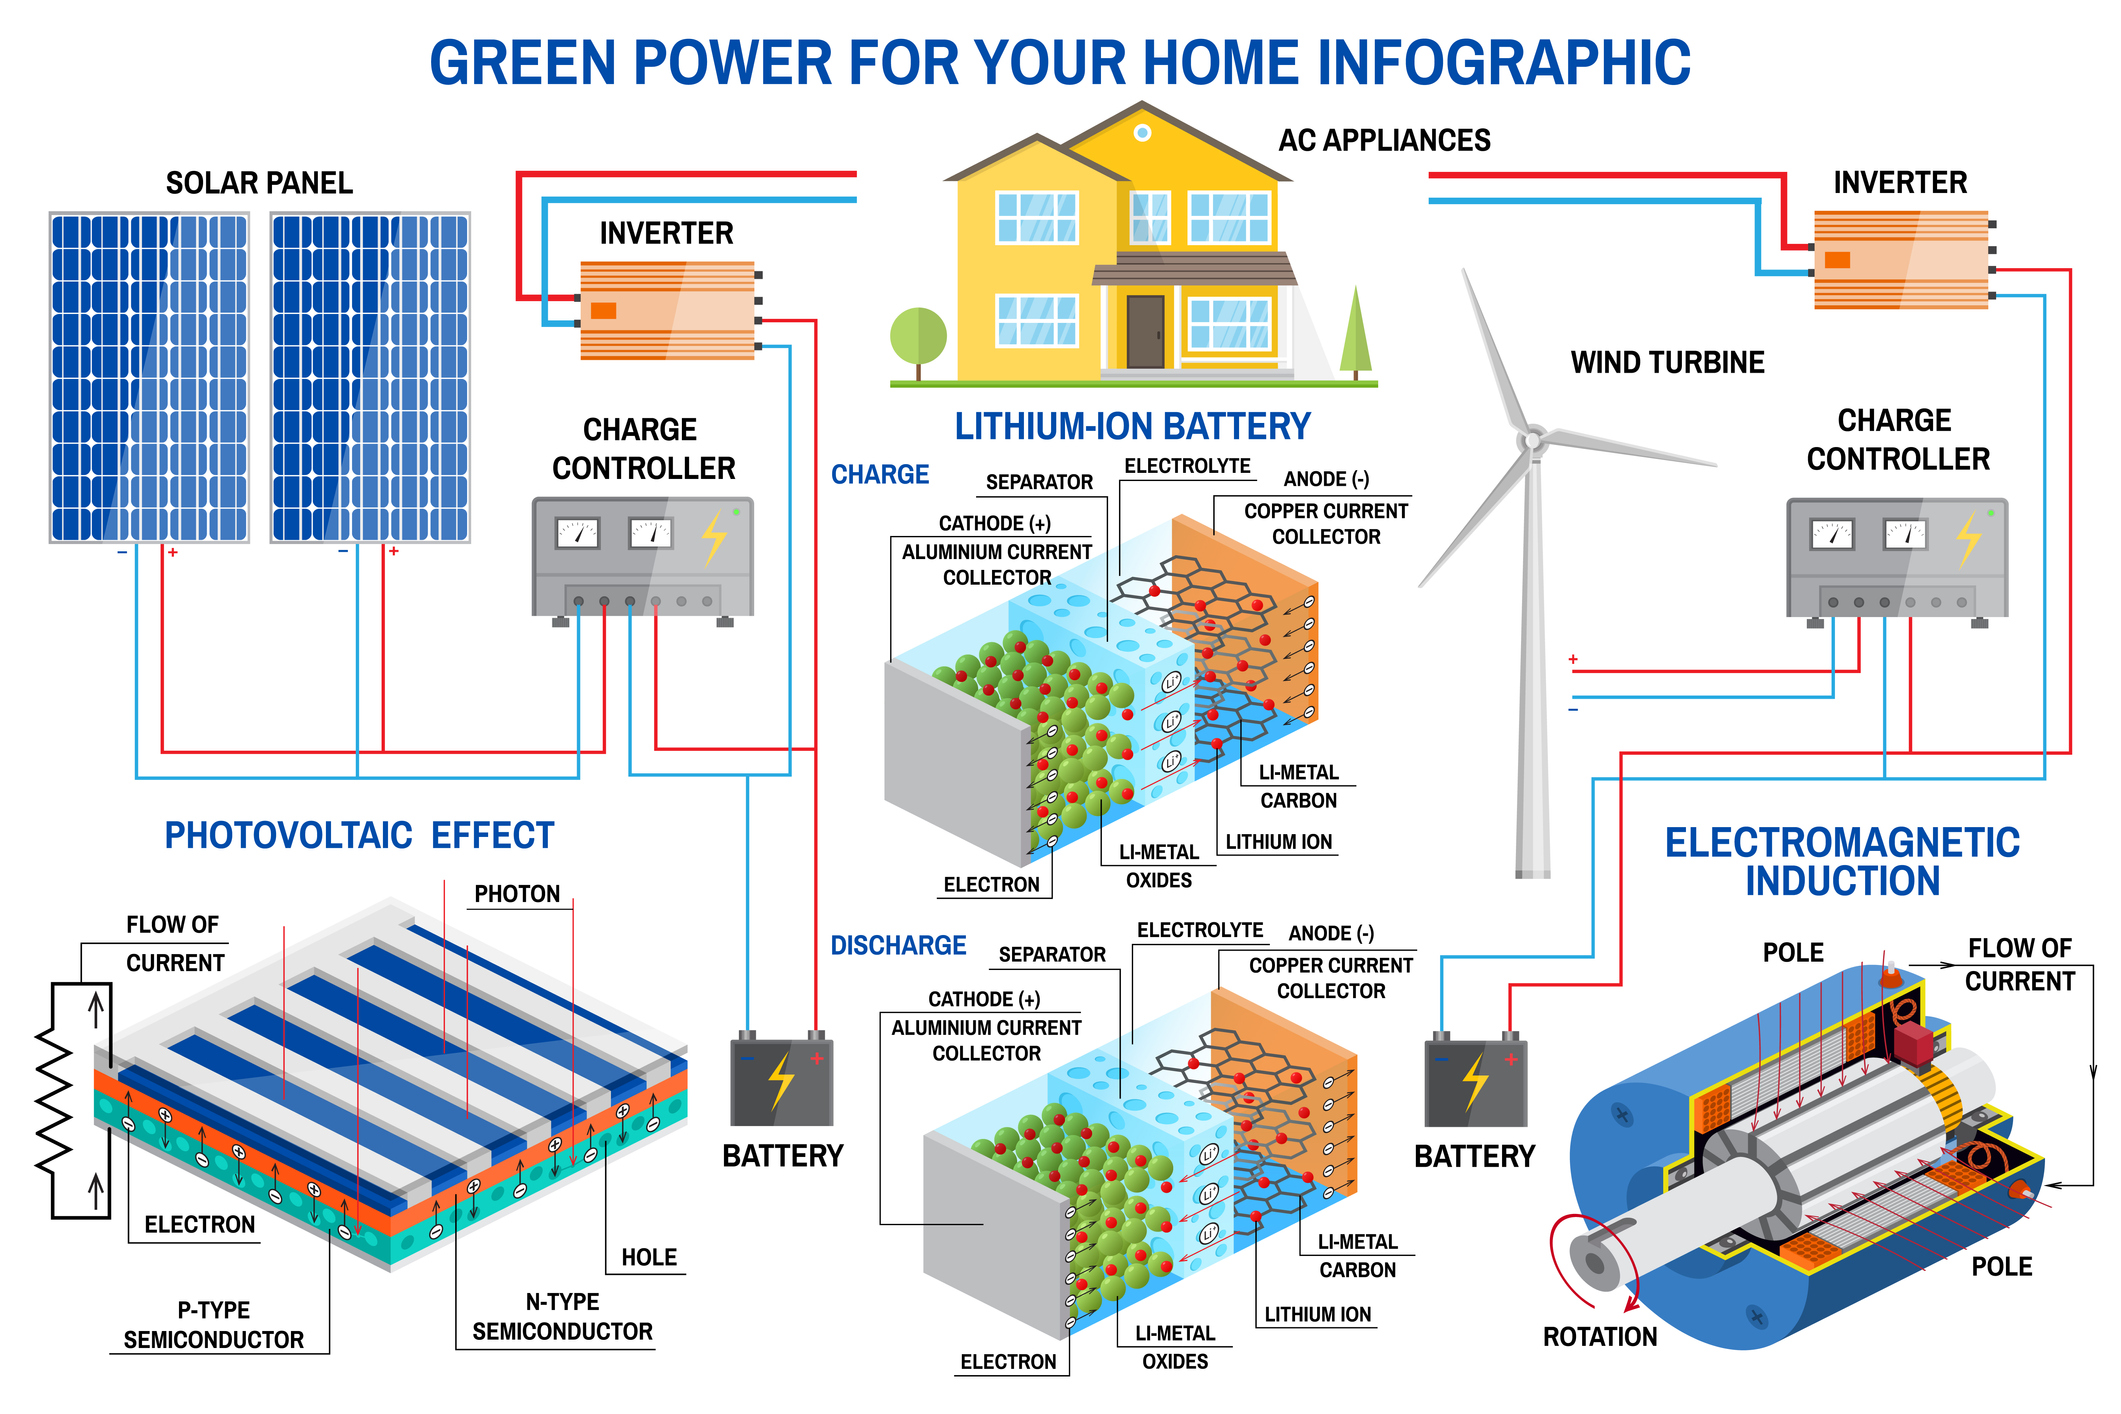 Infographic depicting the engineering behind commercial solar panels and wind turbines